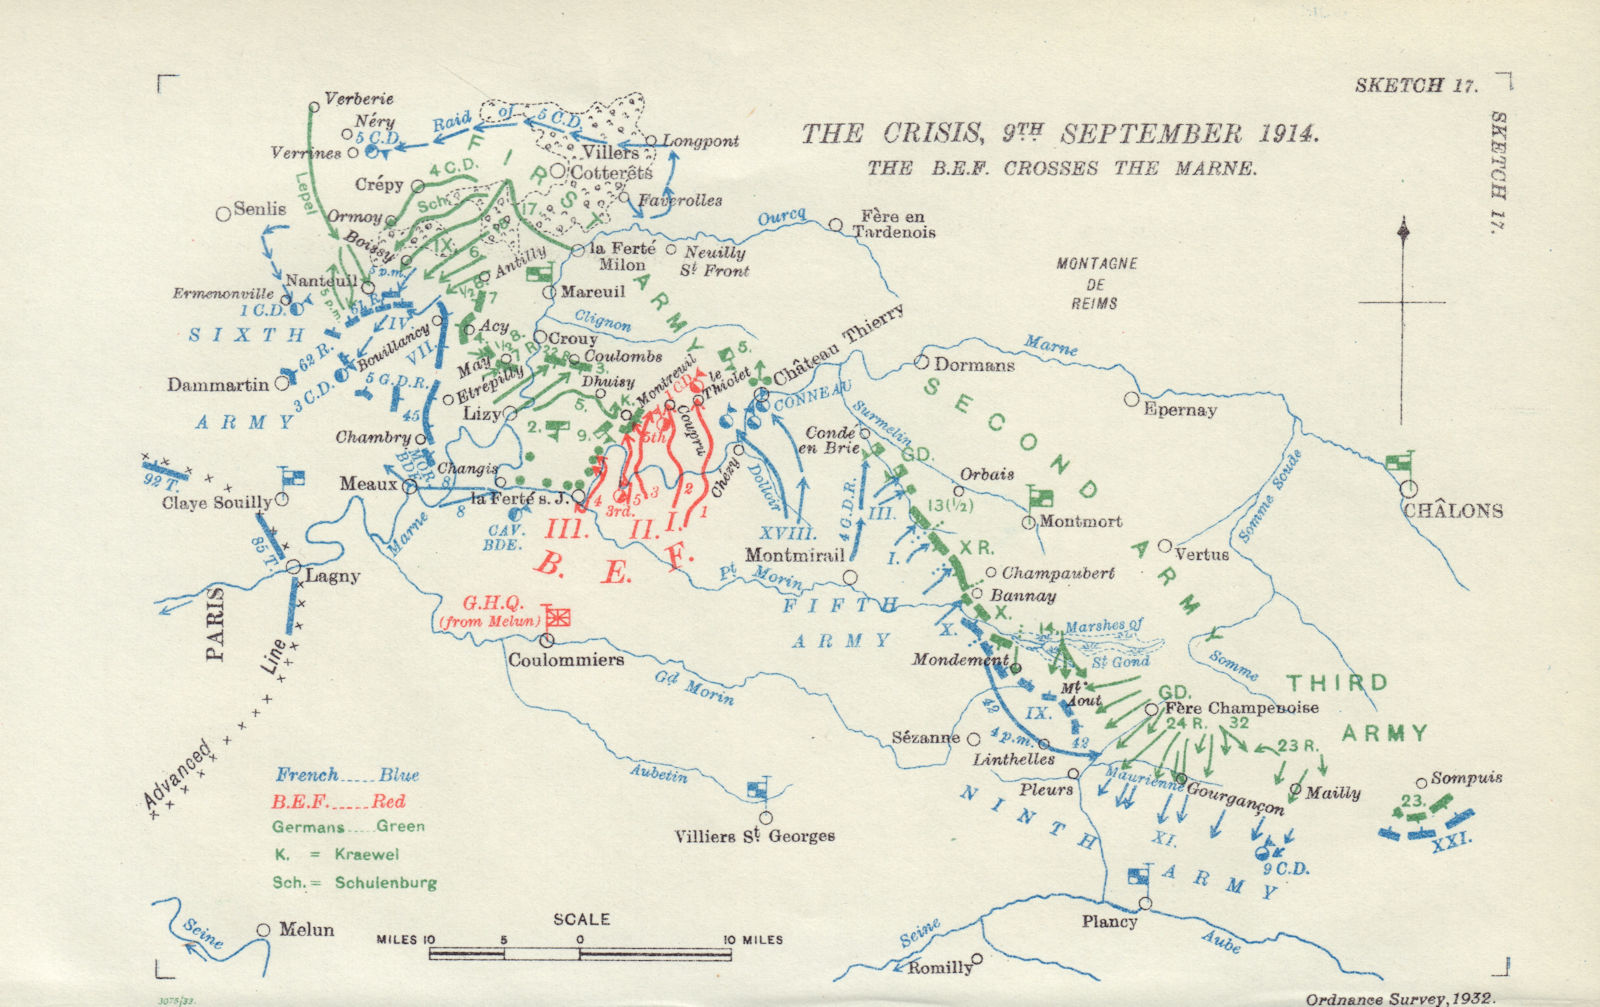 Battle of the Marne. Crisis 9th September 1914 B.E.F. crosses the Marne 1933 map